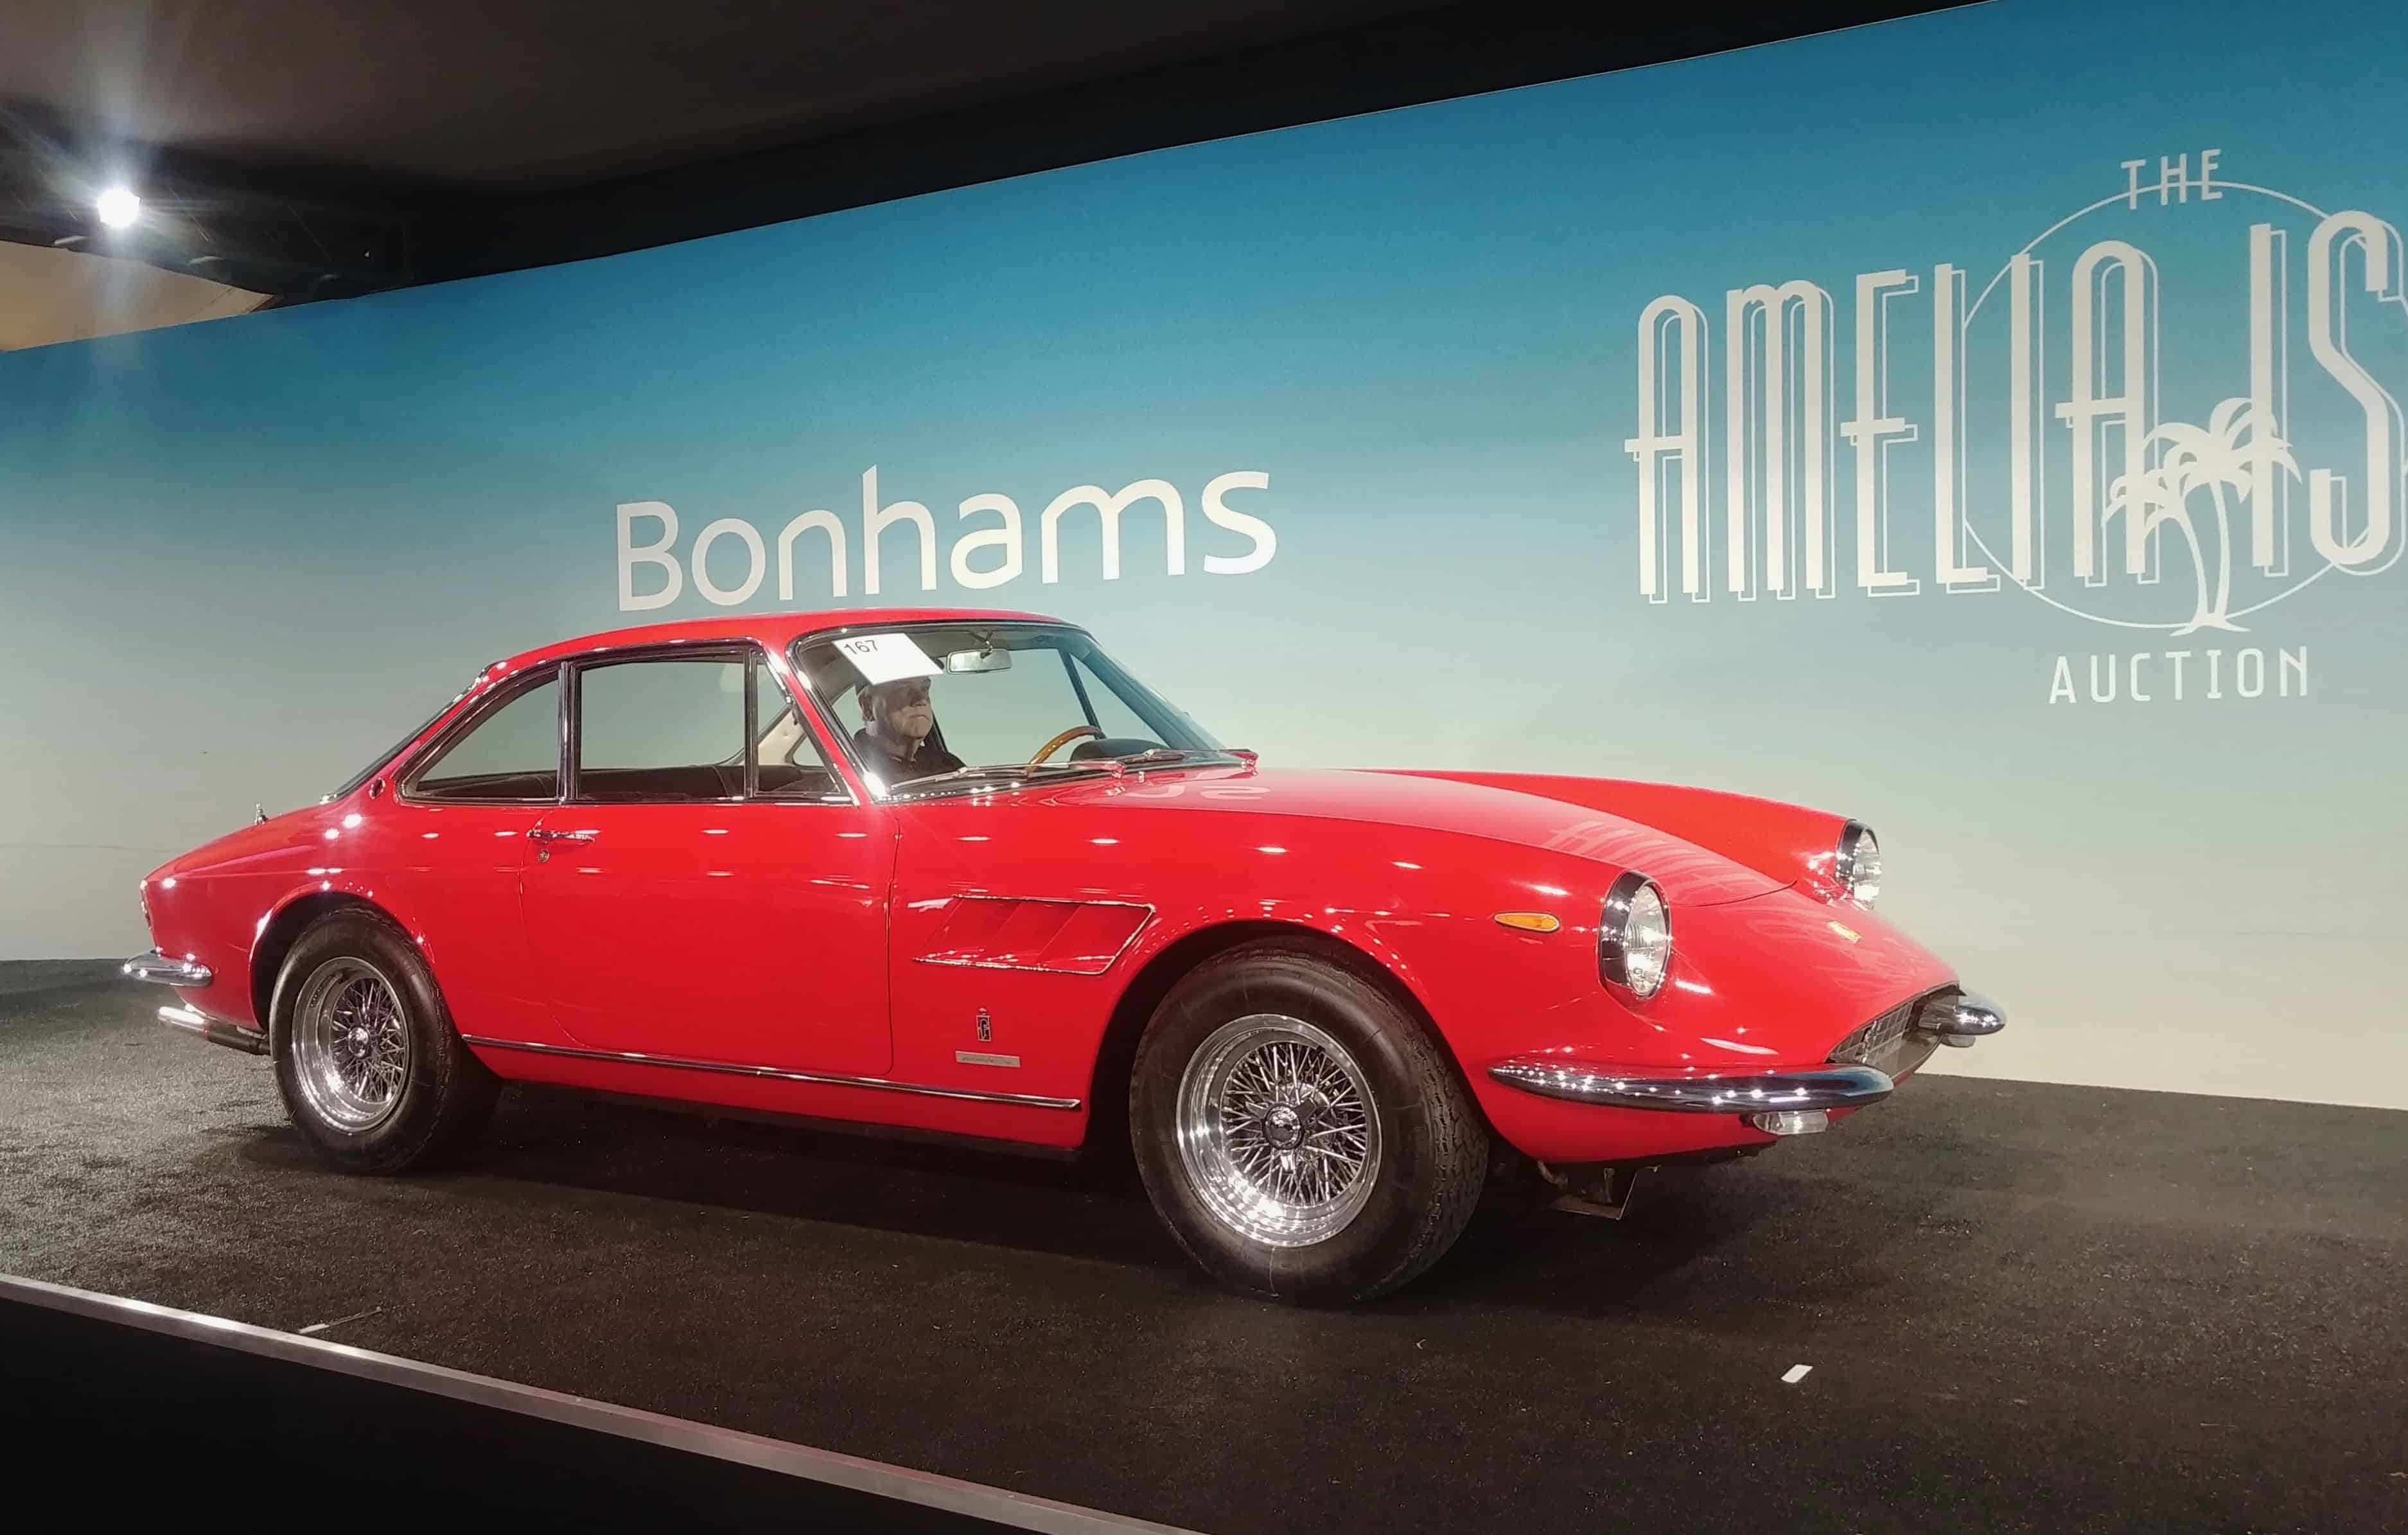 Bonhams opens Amelia auctions with strong showing | ClassicCars.com